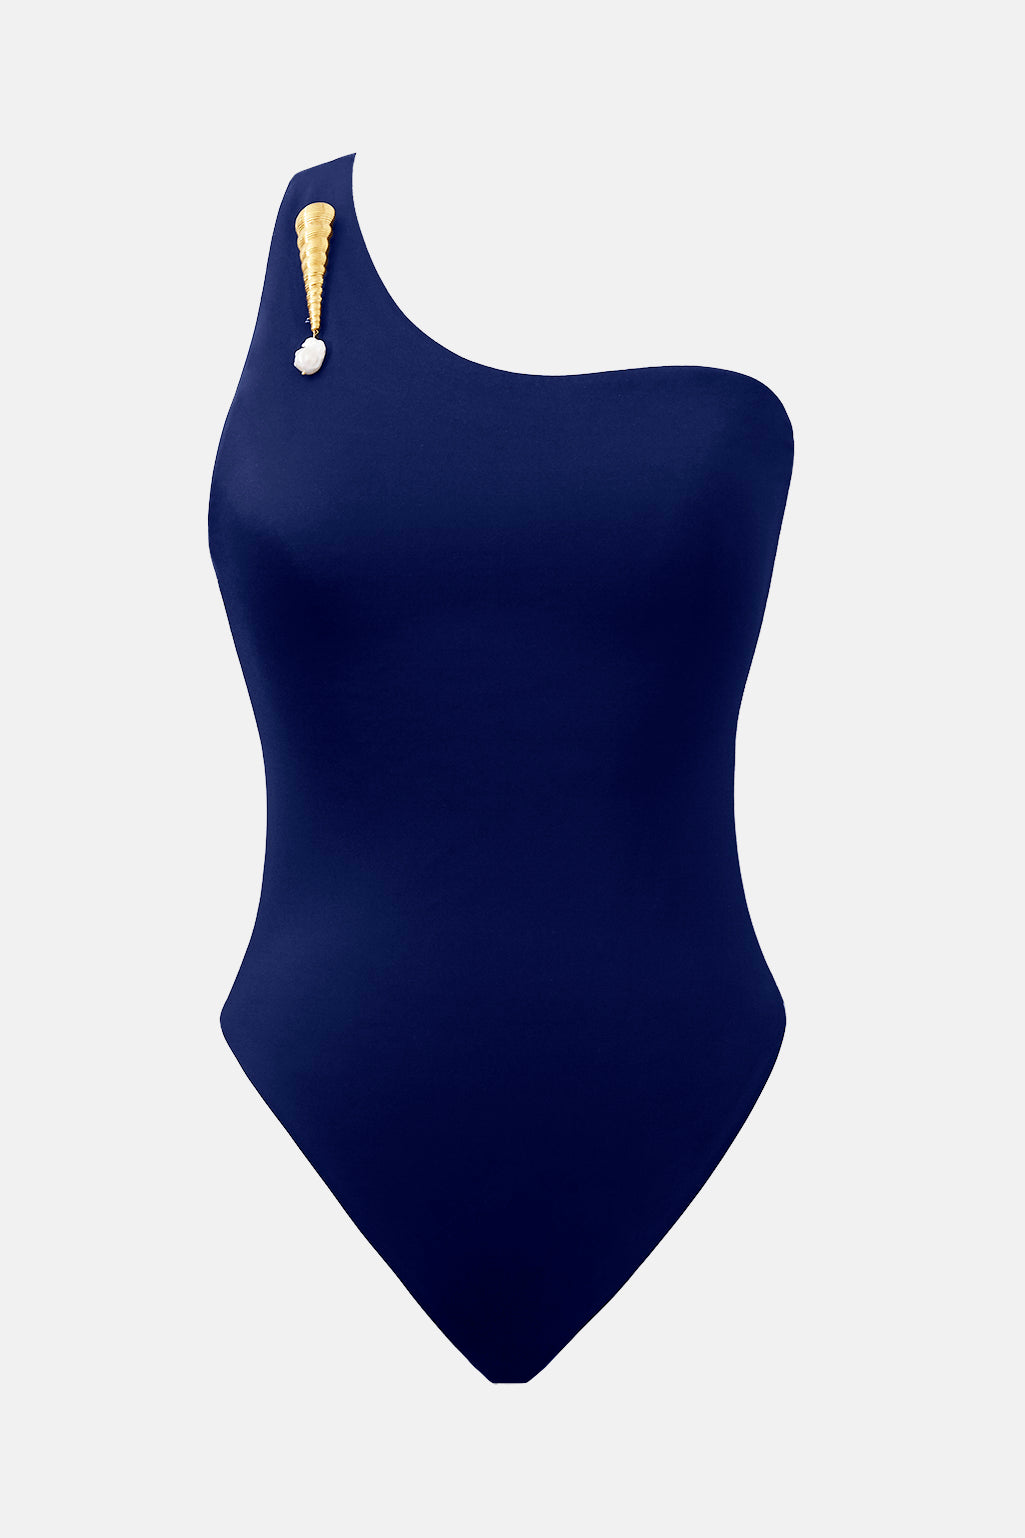 THE TOBI MAILLOT SAPPHIRE BLUE ONE PIECE SWIMSUIT ONE SHOULDER BATHING SUIT WITH GOLD PEARL BROOCH SUSTAINABLE BATHING SUIT LUXURY DESIGNER SWIMWEAR